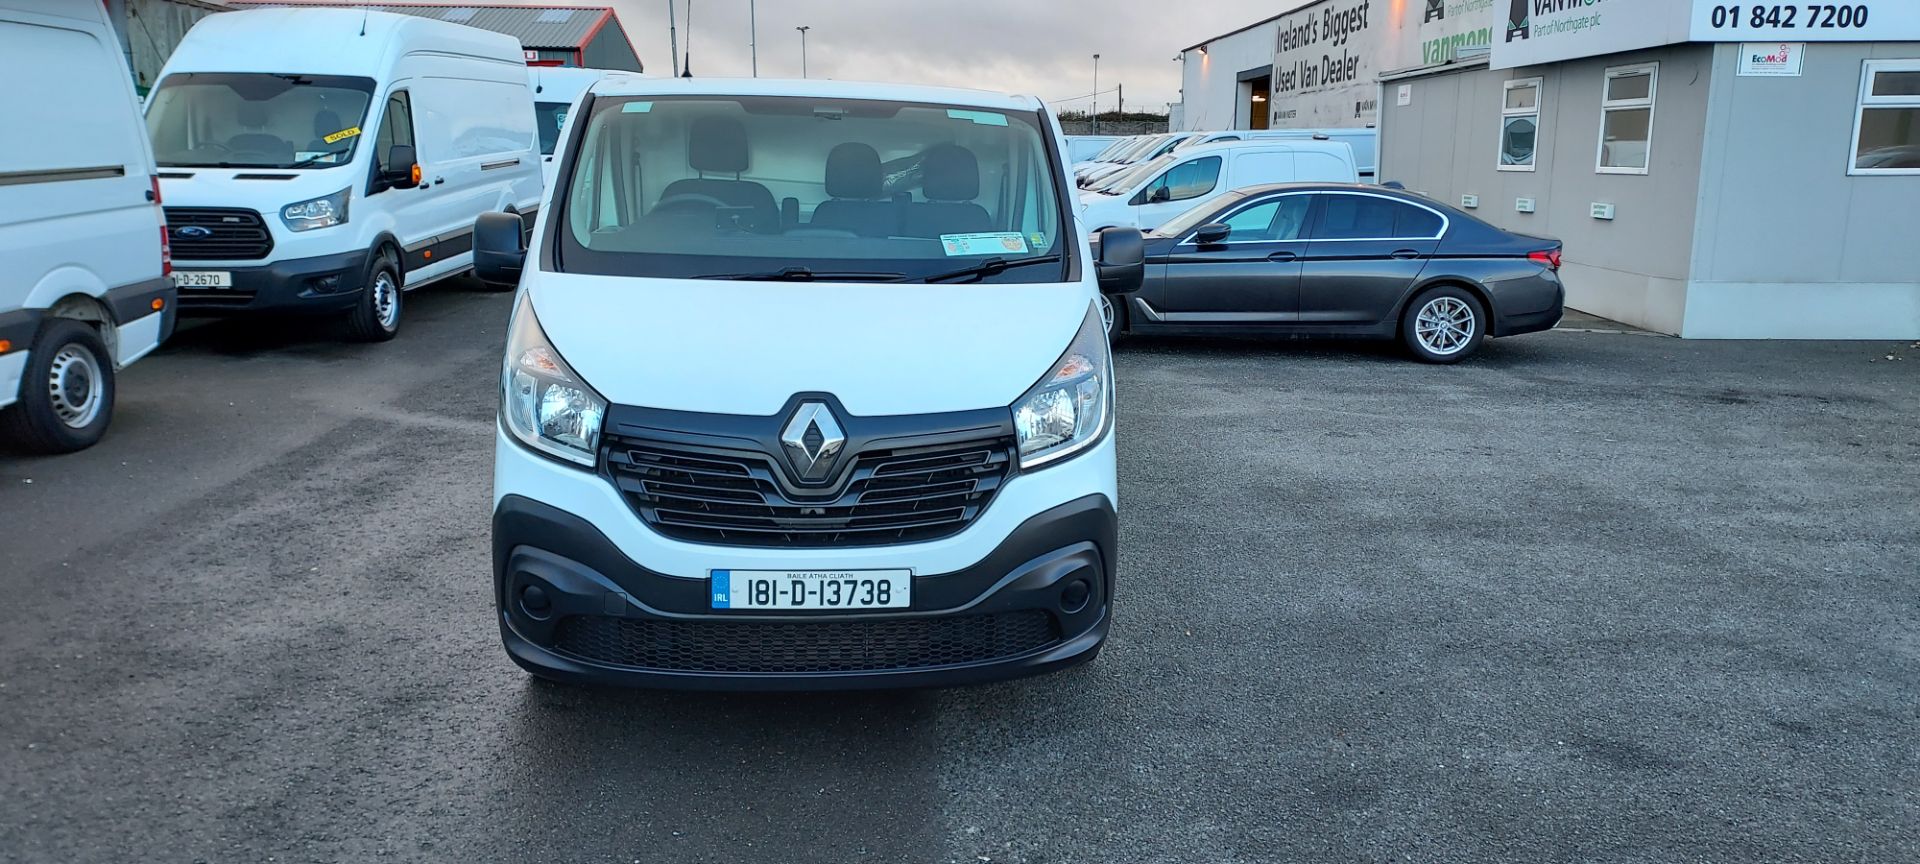 2018 Renault Trafic LL29 DCI 120 Business 3DR (181D13738) Thumbnail 2